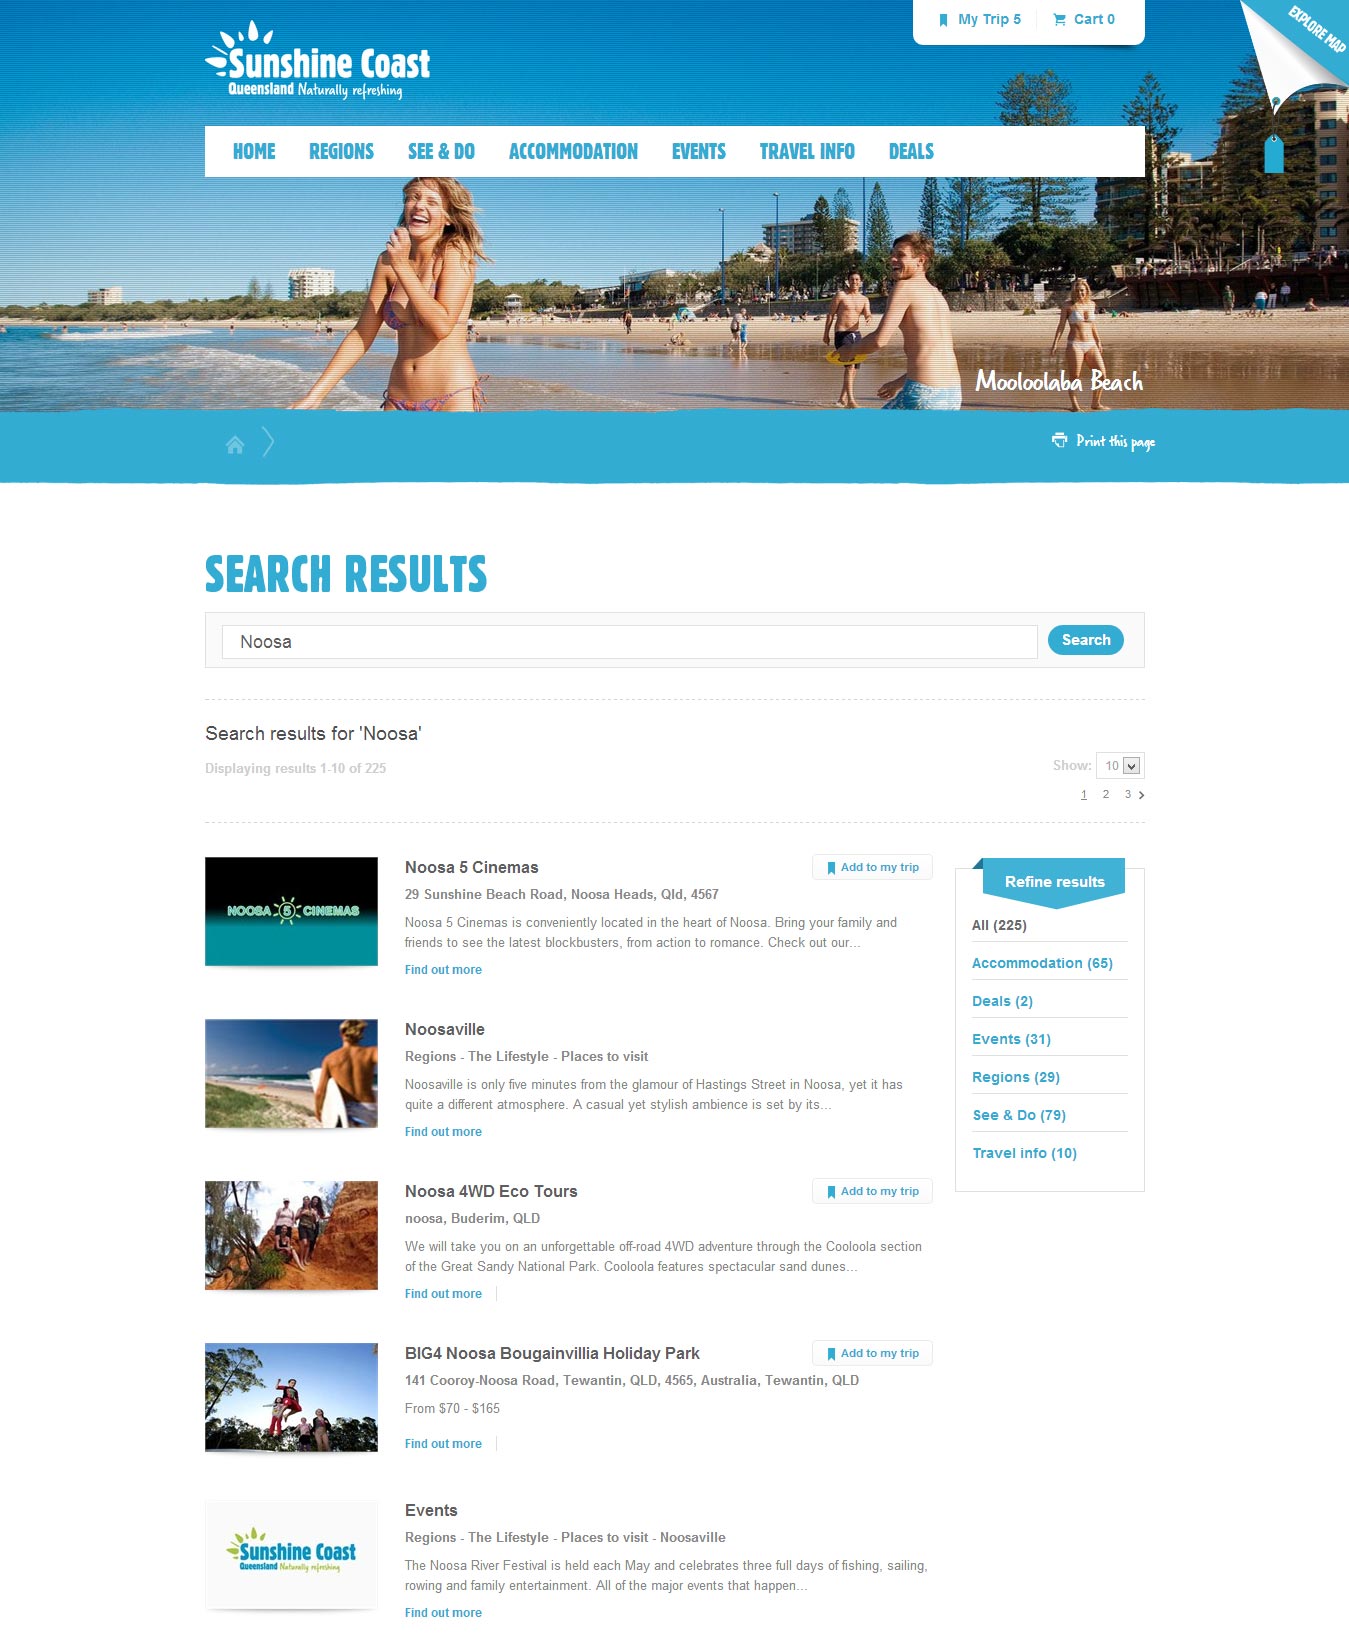 Sunshine Coast search results page.